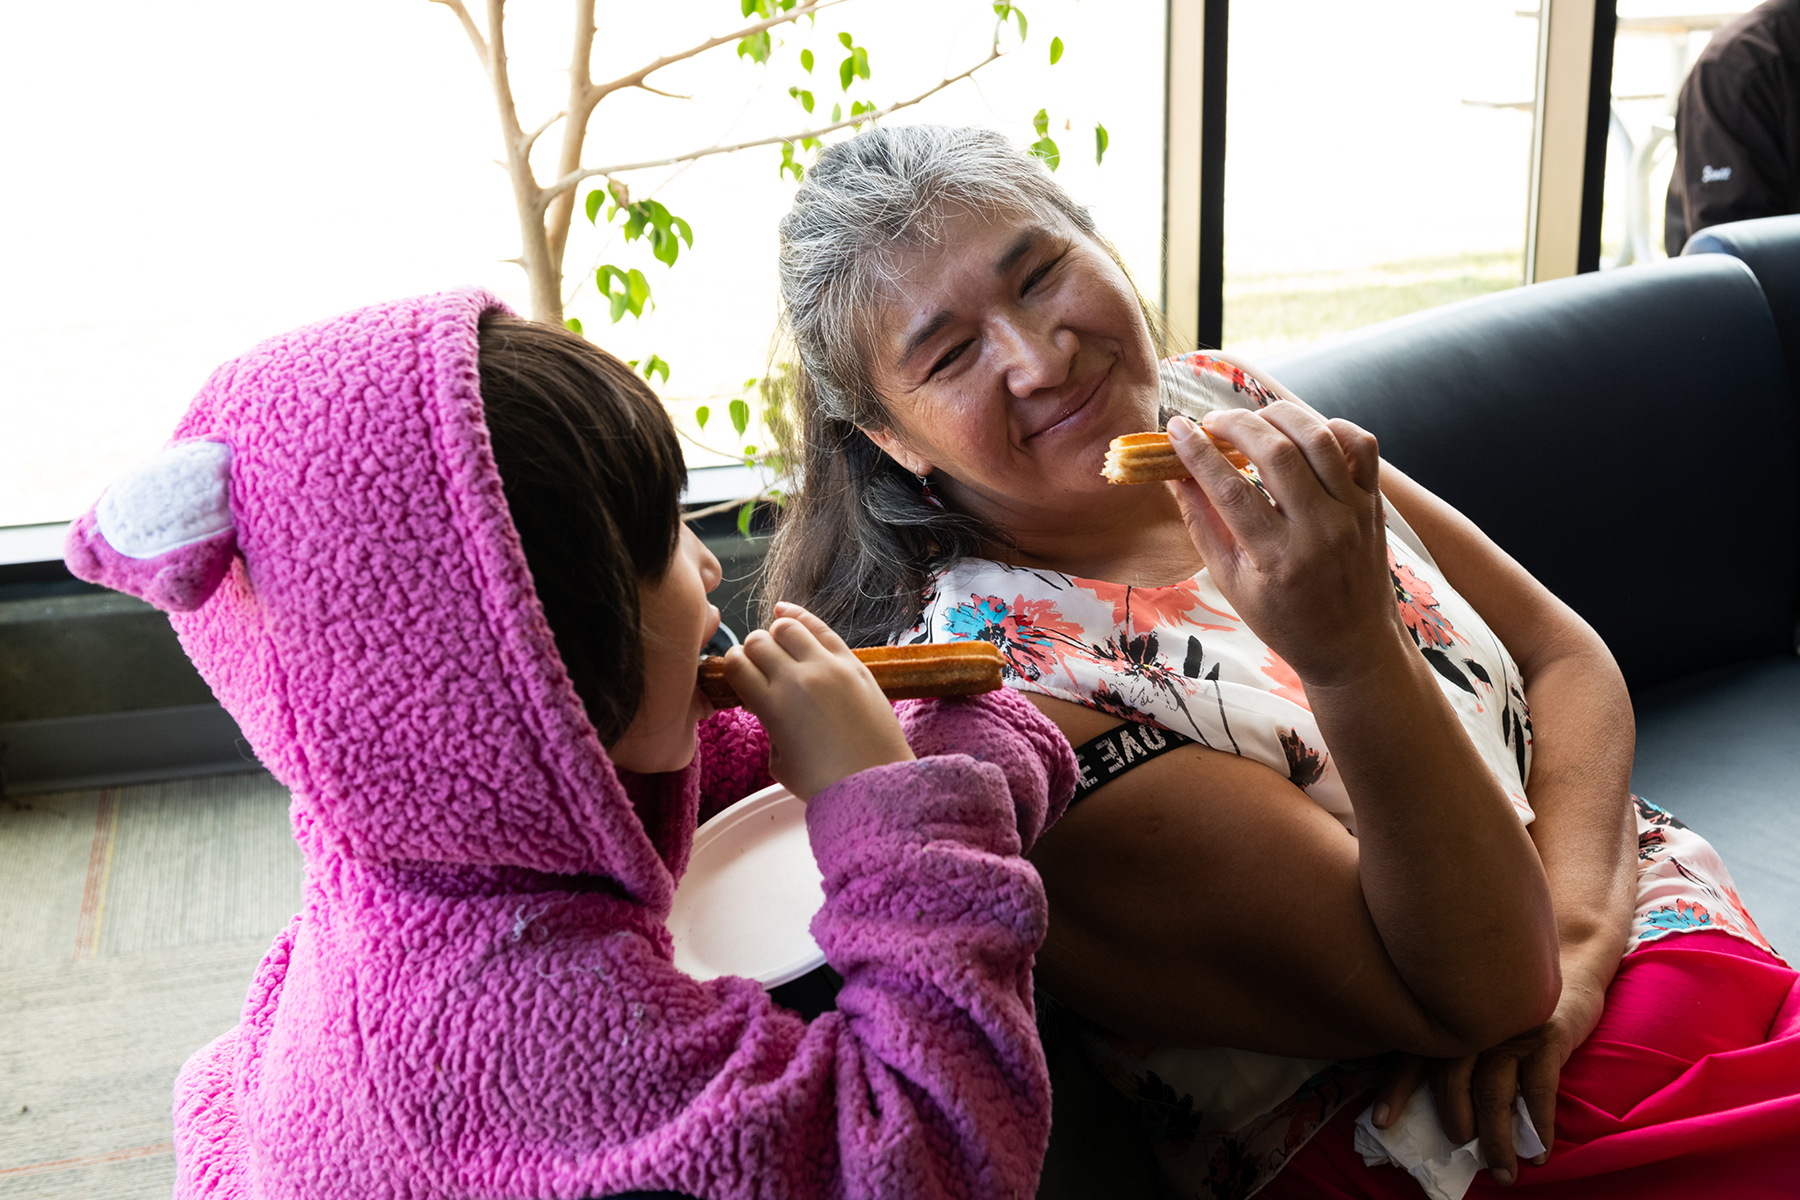 An Indigenous grandmother and granddaughter enjoying churros, sitting on a couch.